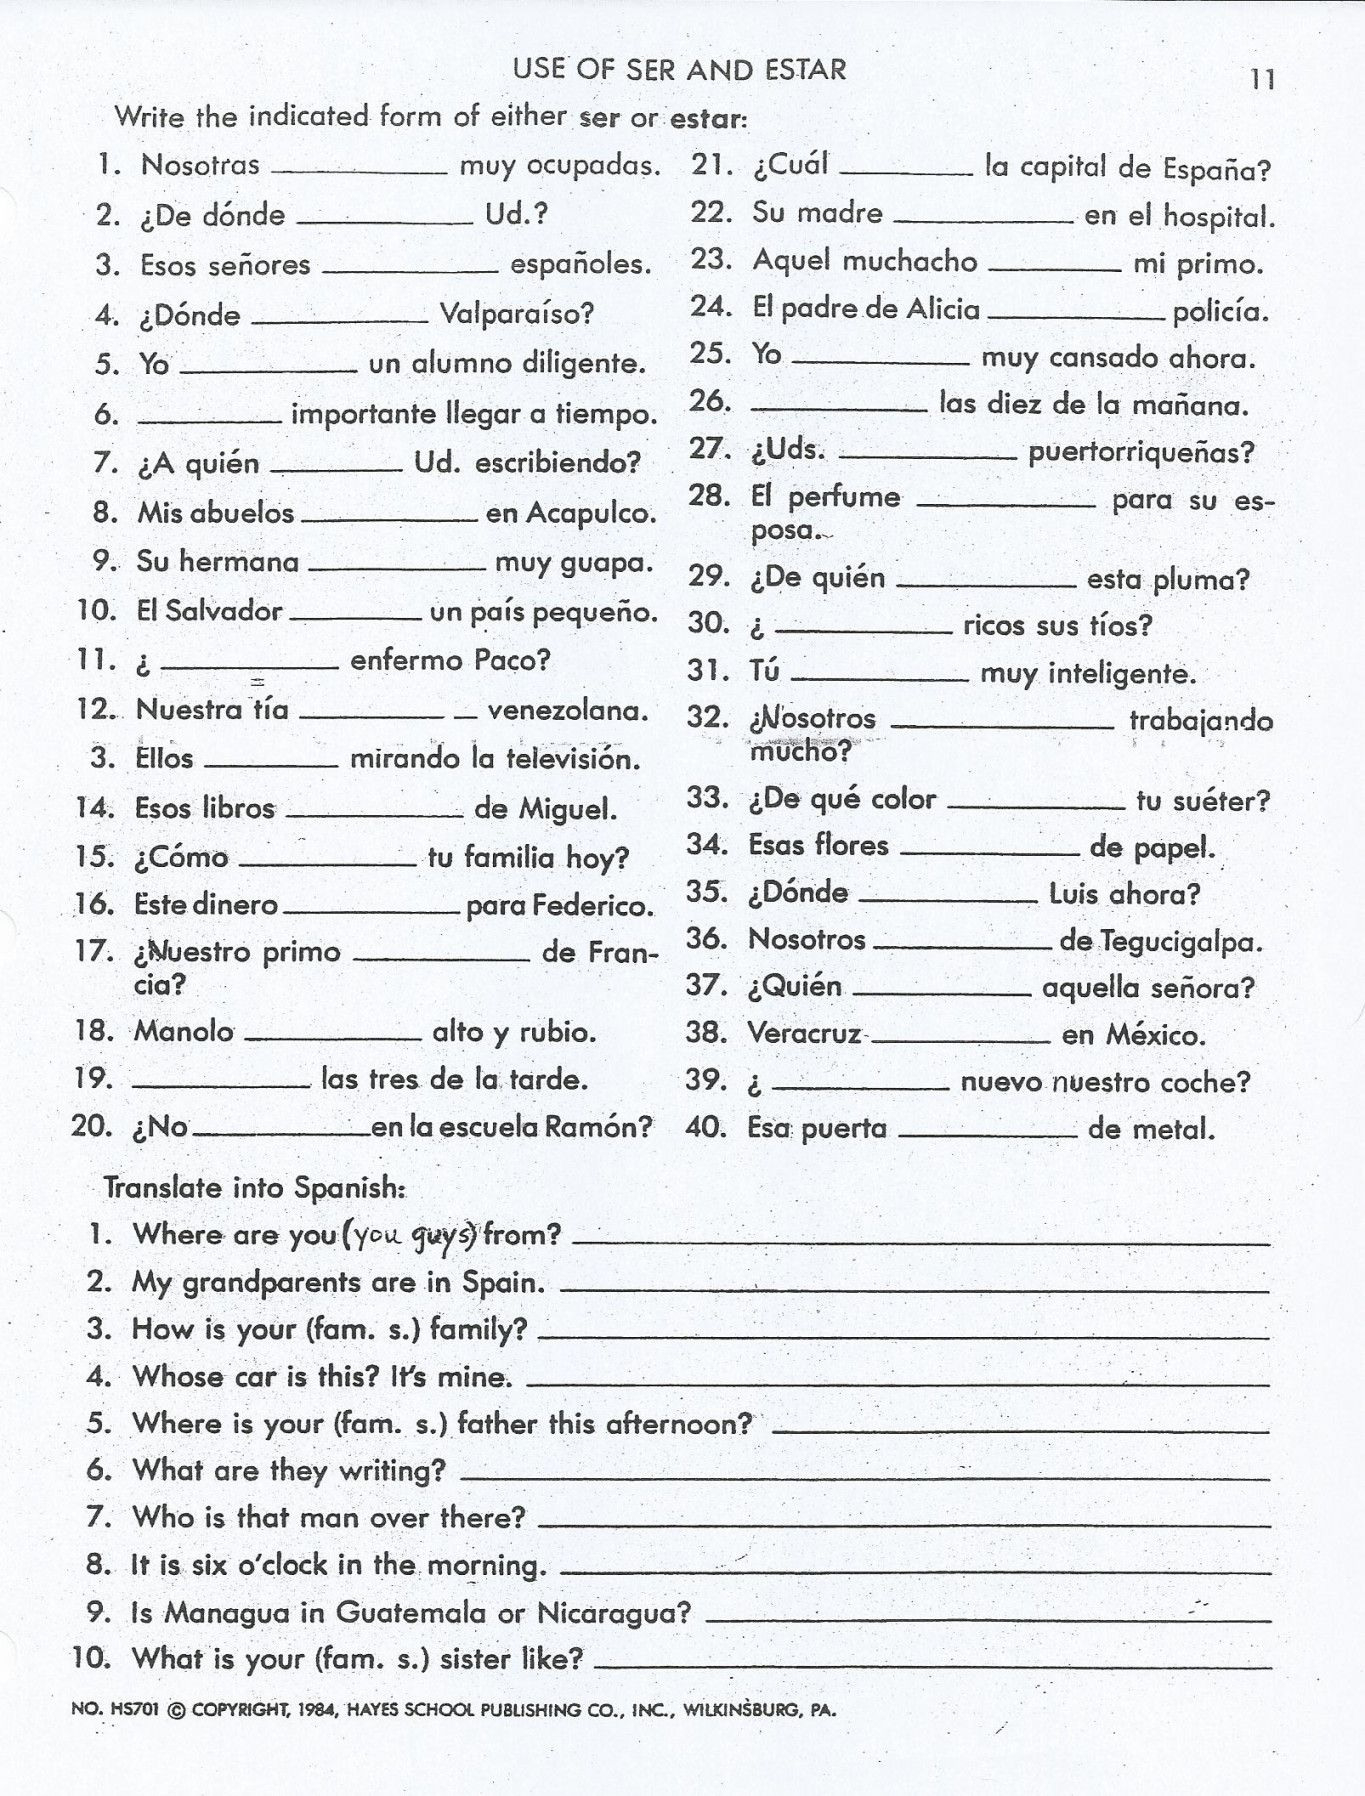 agreement-of-adjectives-spanish-worksheet-answers-hayes-school-db